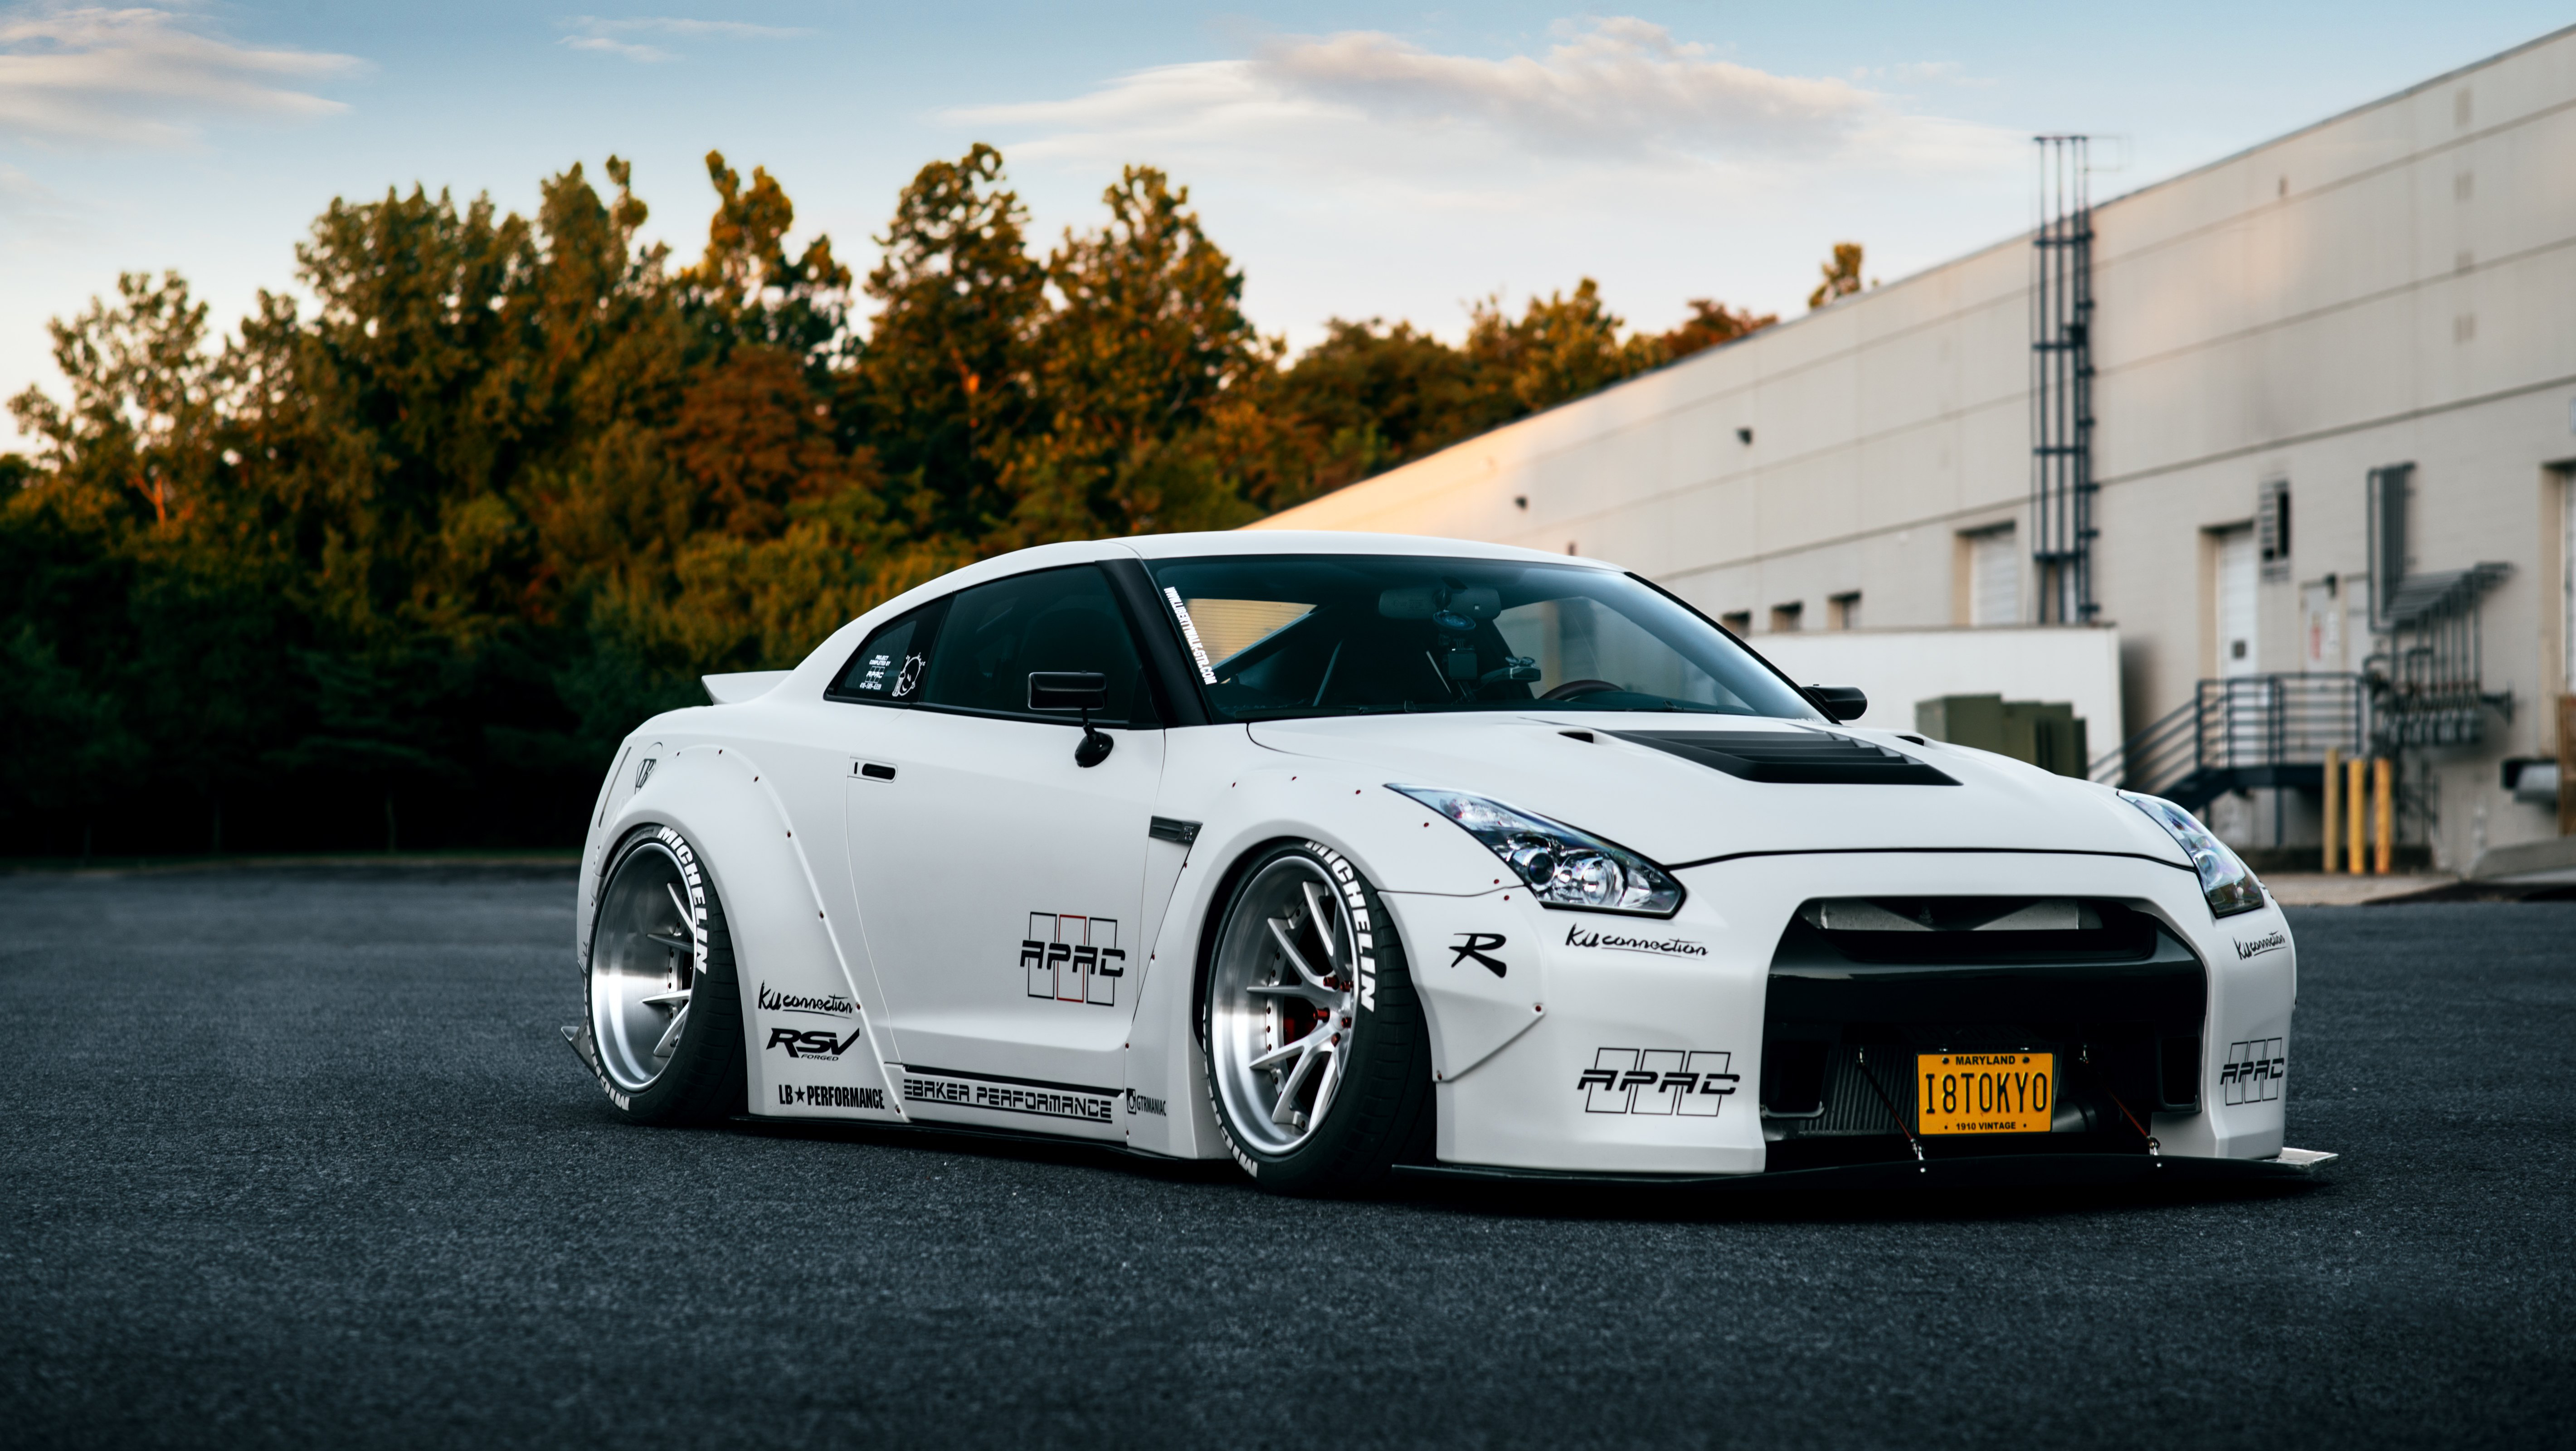 Wallpaper Pc Gtr Nissan GTR R HD Wallpapers Pictures Free Live Wallpaper For Your